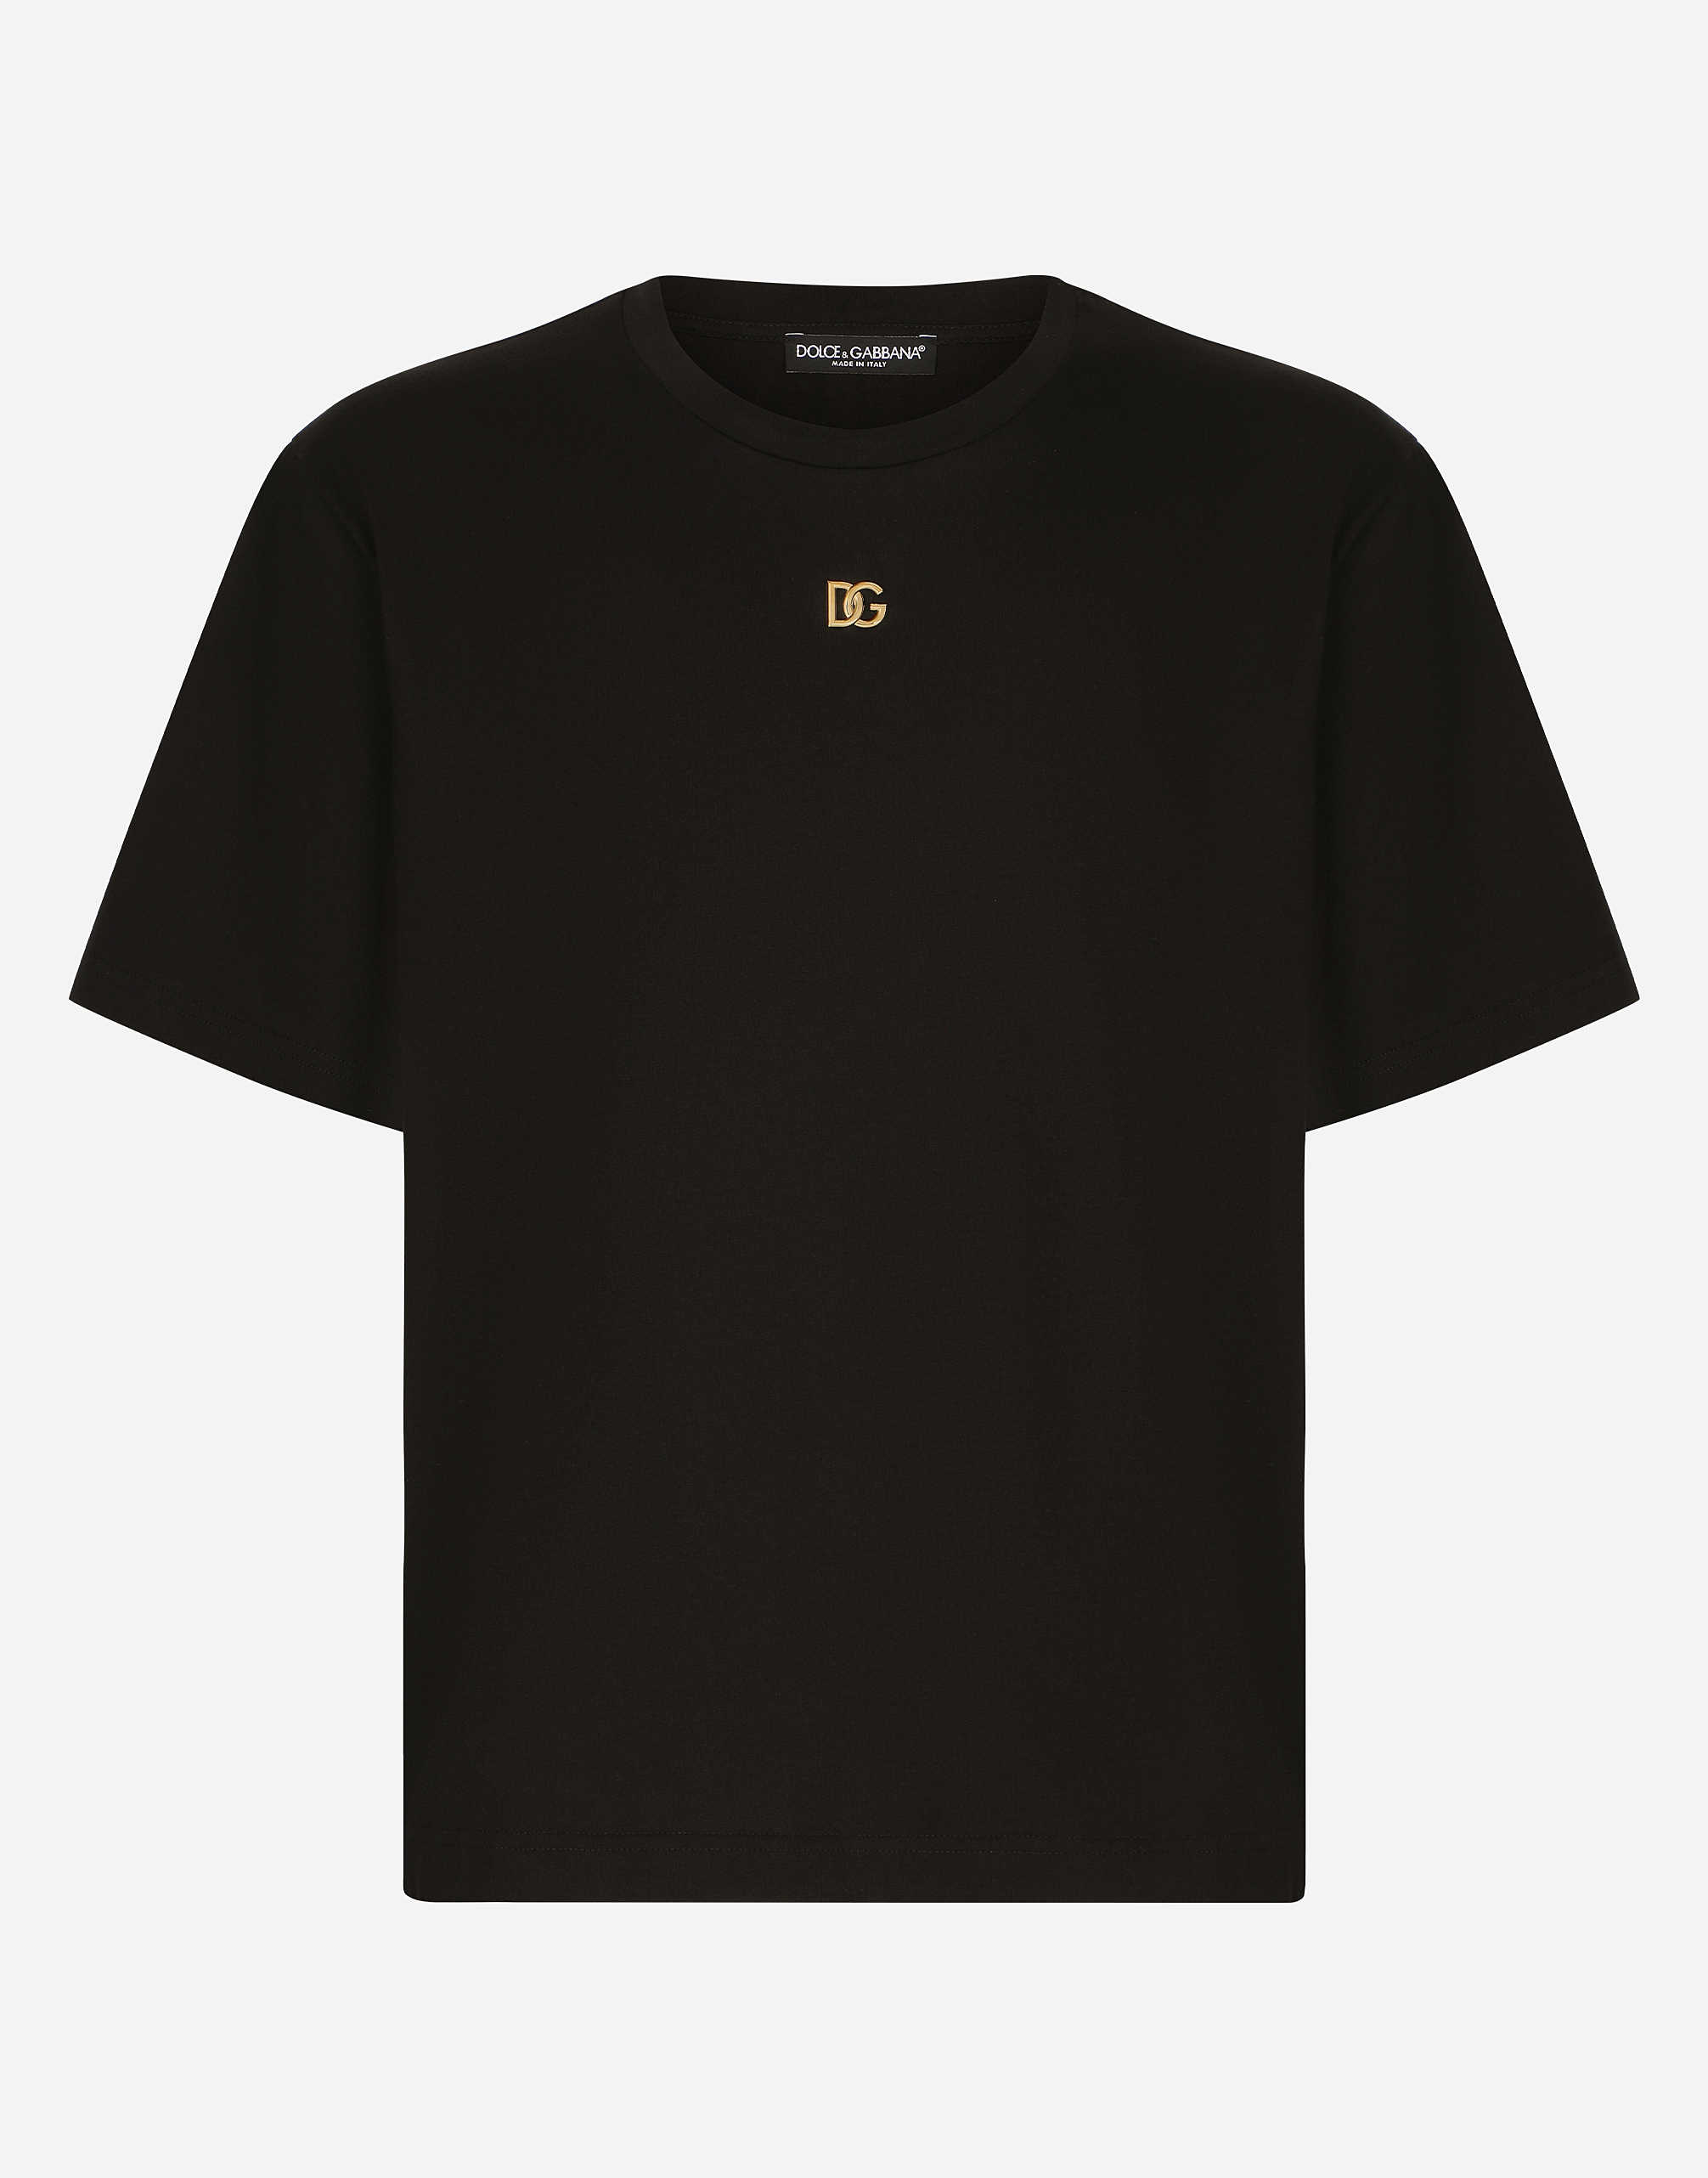 Cotton T-shirt with DG logo in Black